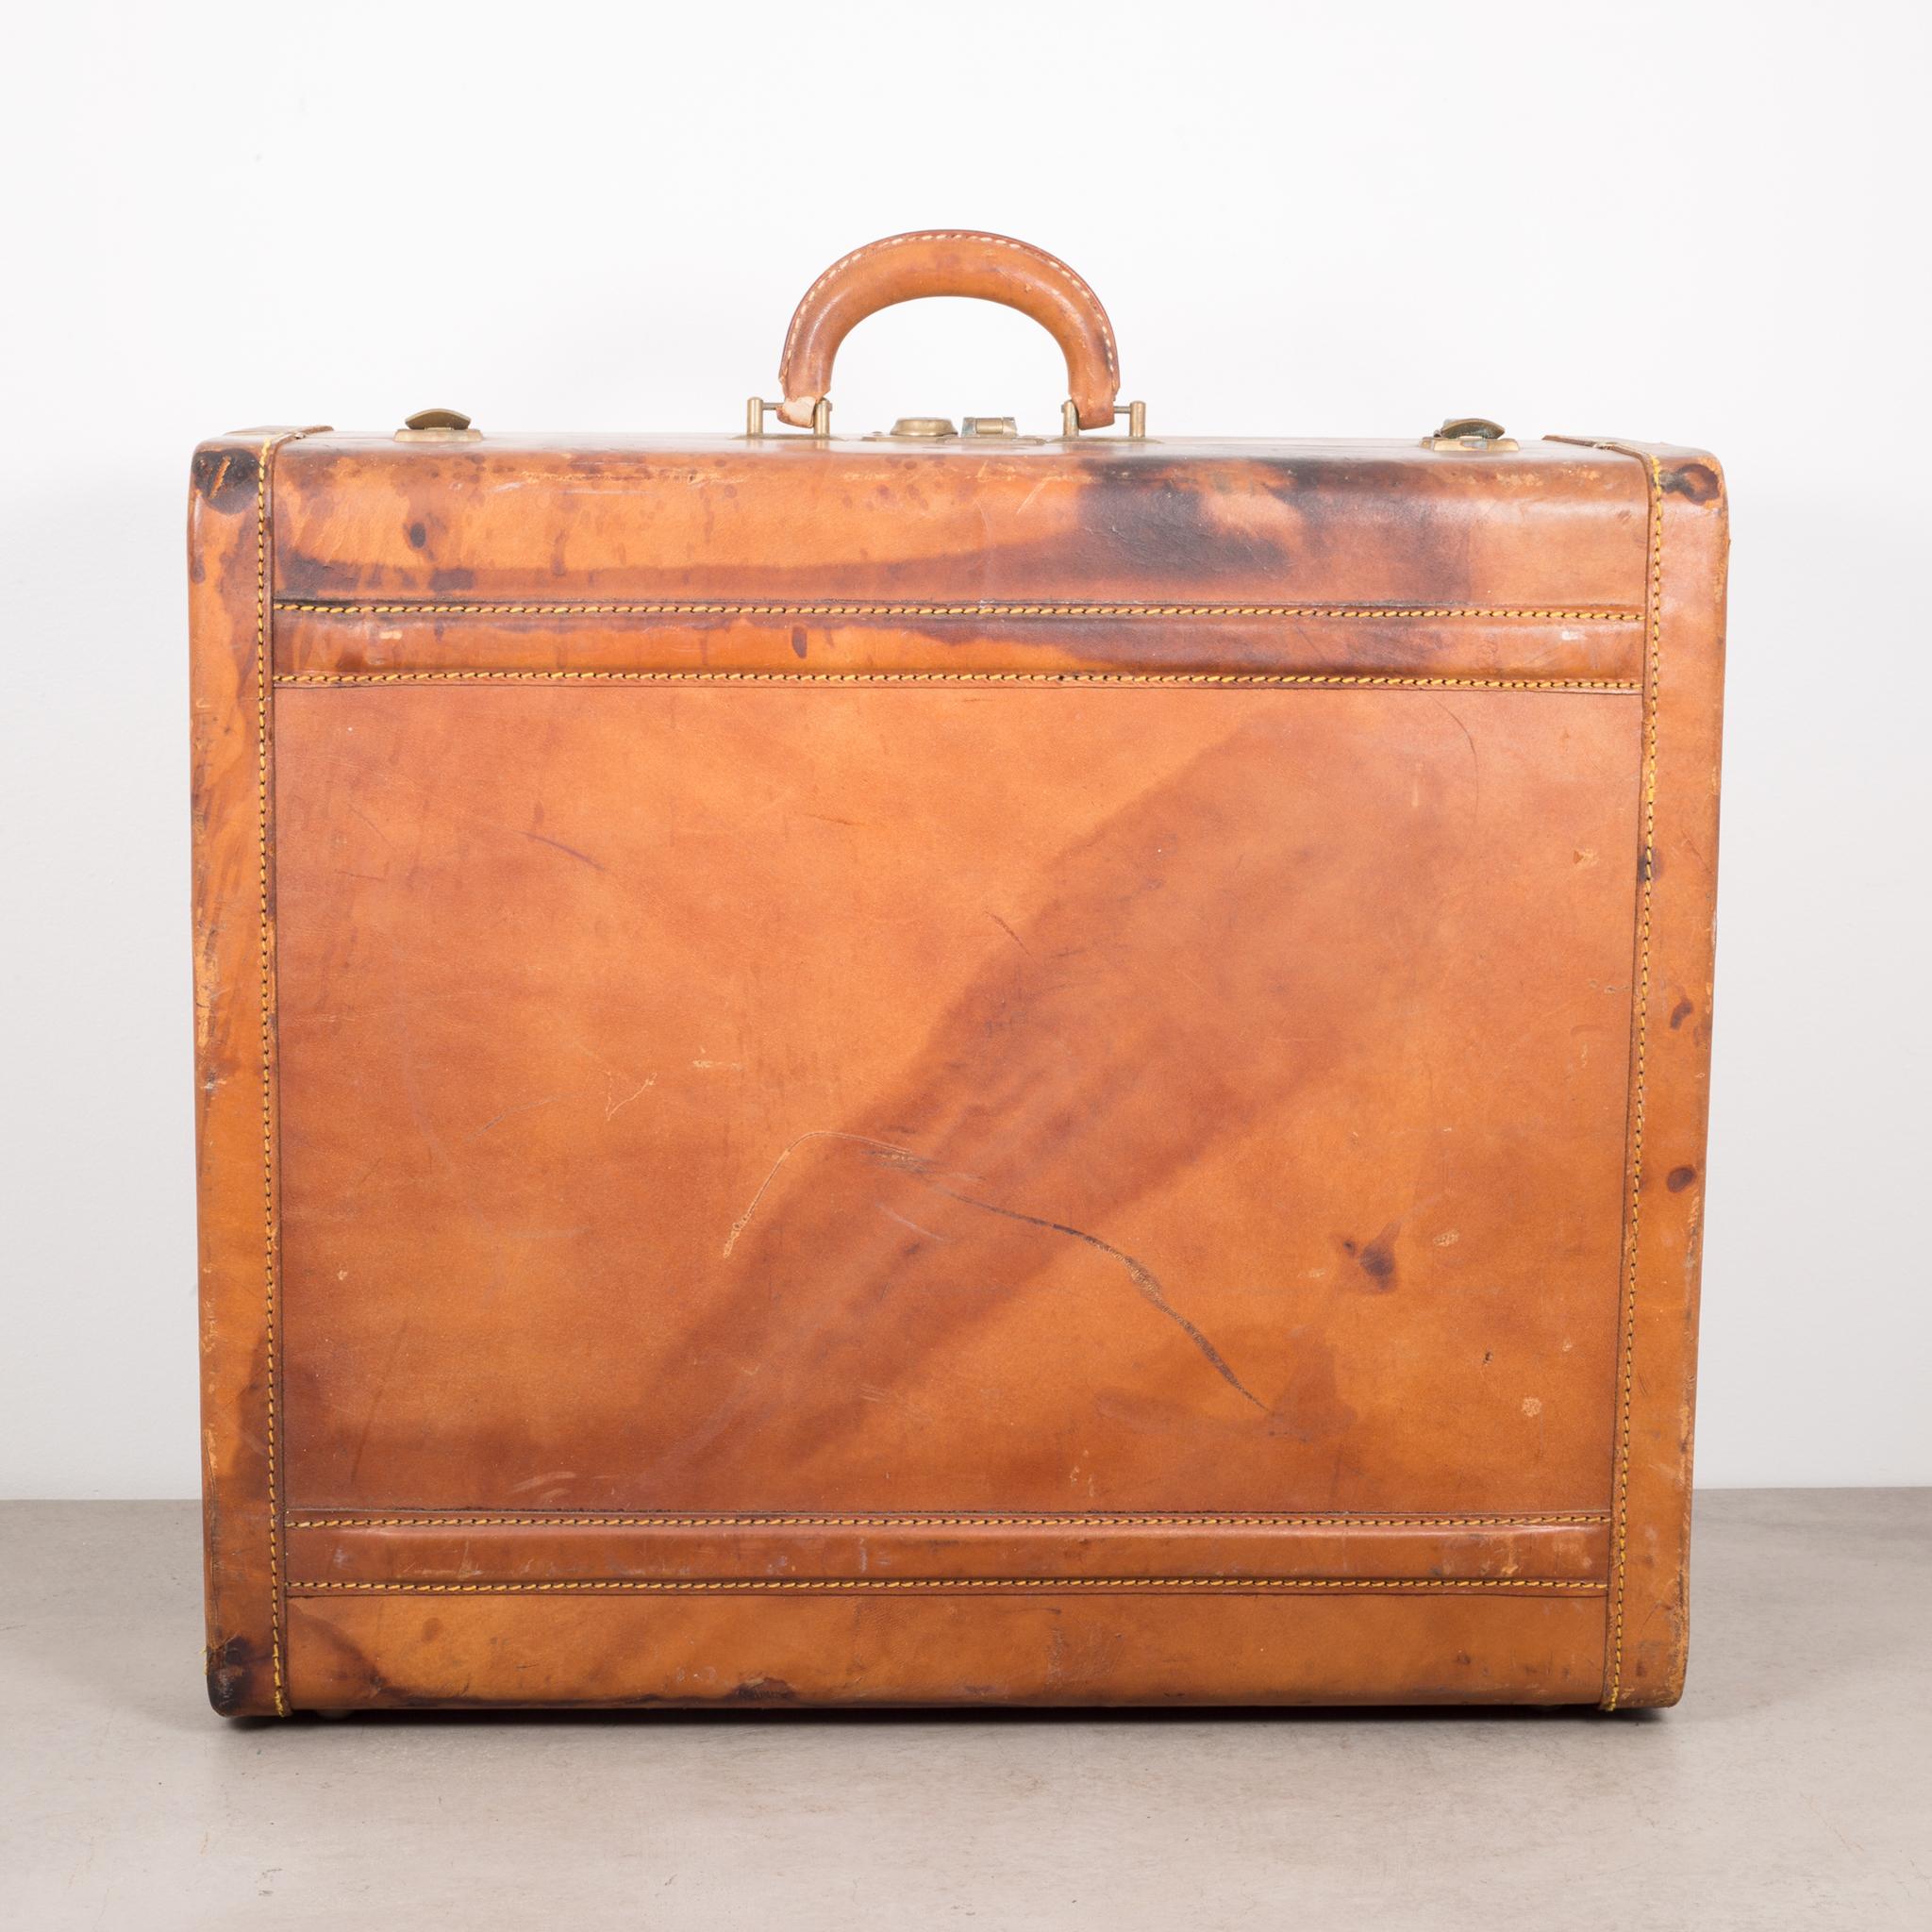 About:

This a vintage leather suitcase with leather handle and brass locks. The locks open properly. The suitcase is monogrammed 